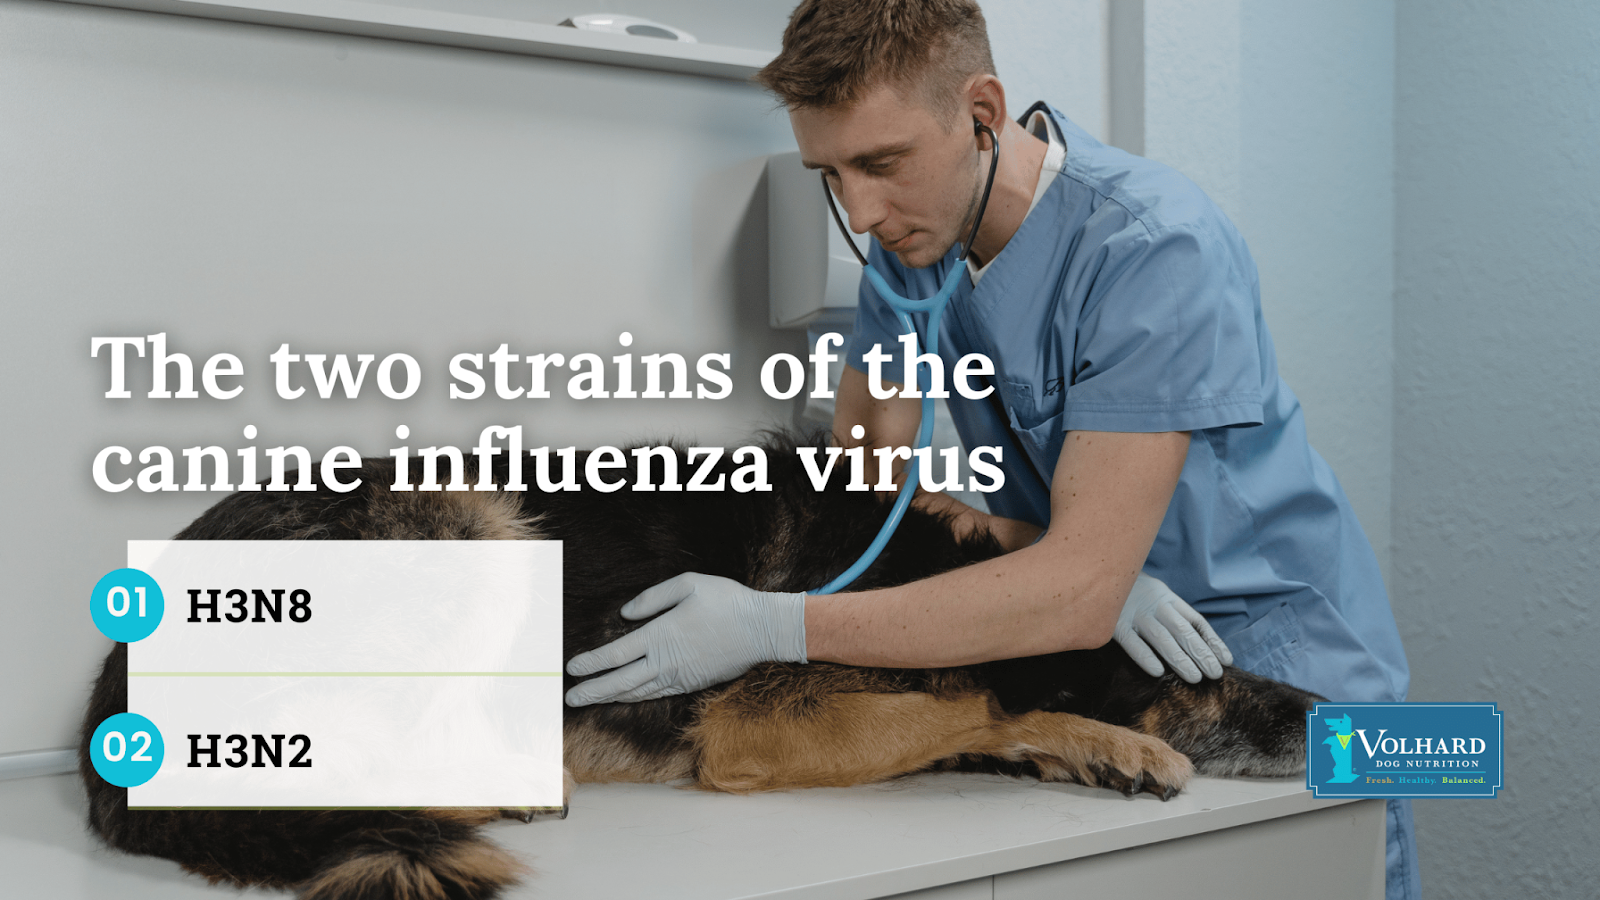 The two strains of the canine influenza virus are H3N8 and H3N2.